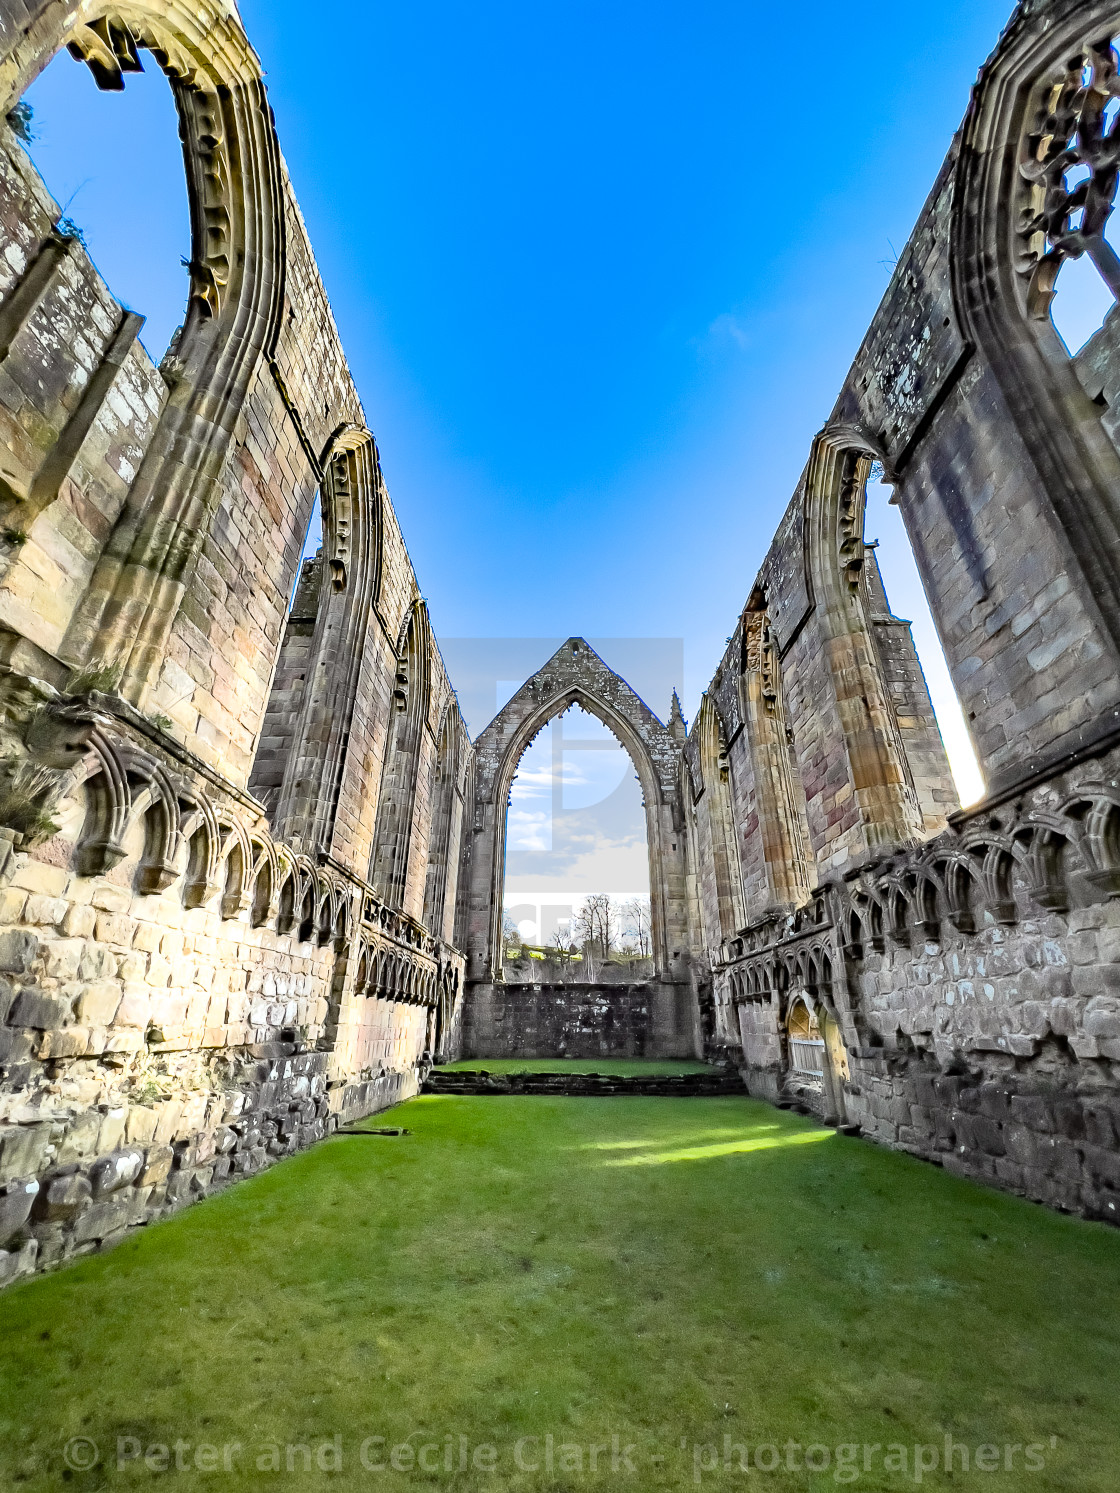 "Bolton Abbey, Priory Ruins, Yorkshire." stock image